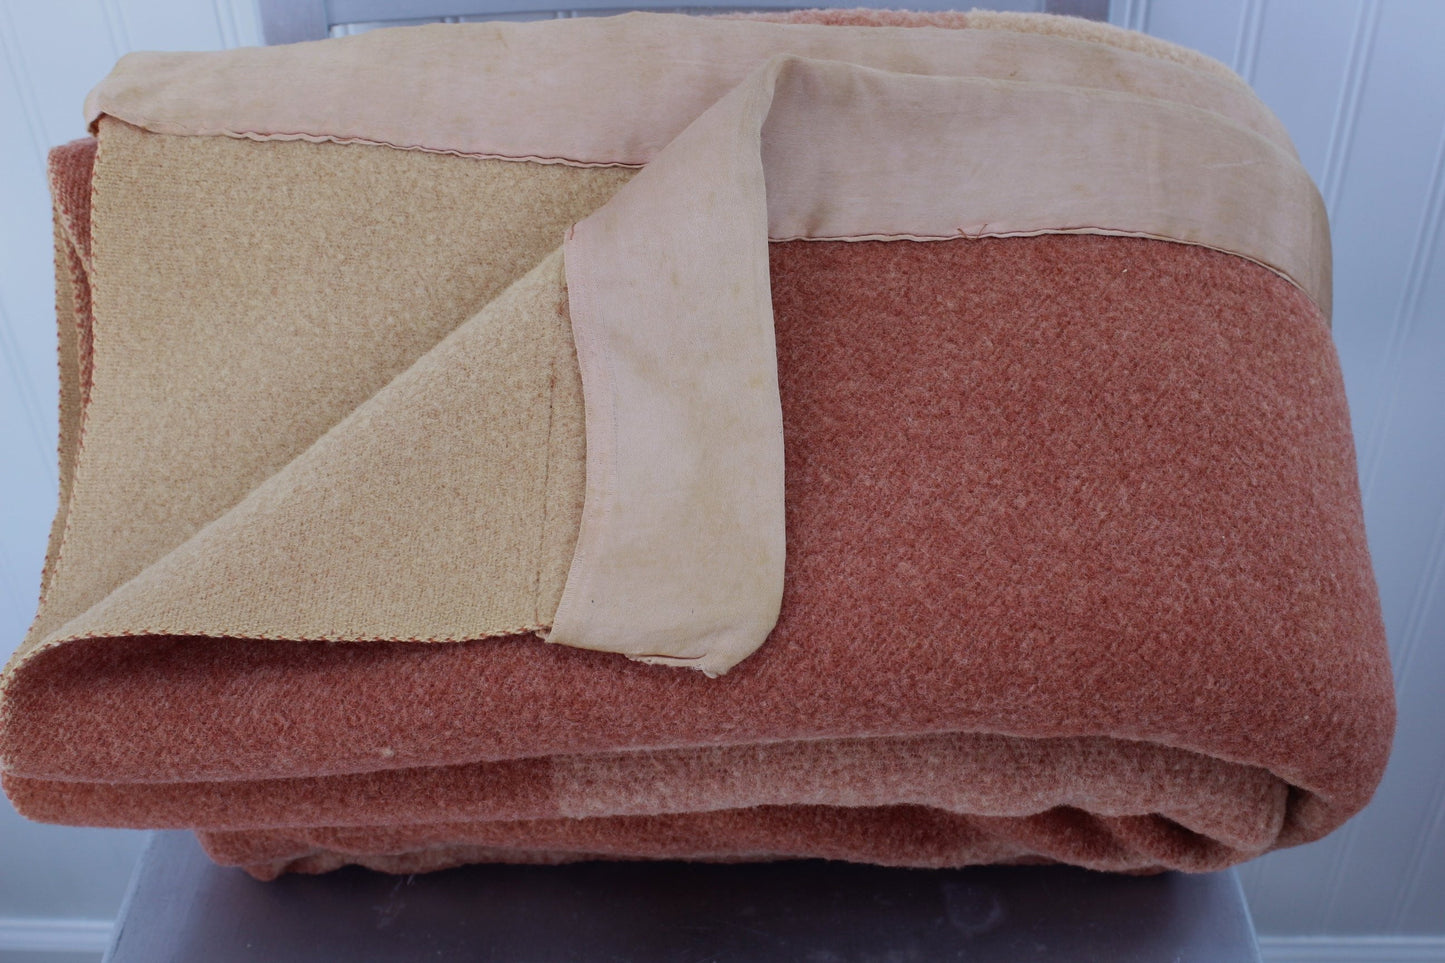 Wool Blanket Vintage 3 Shades Rusty Peach Clay Borders all Sides Mid Century 40s 50s